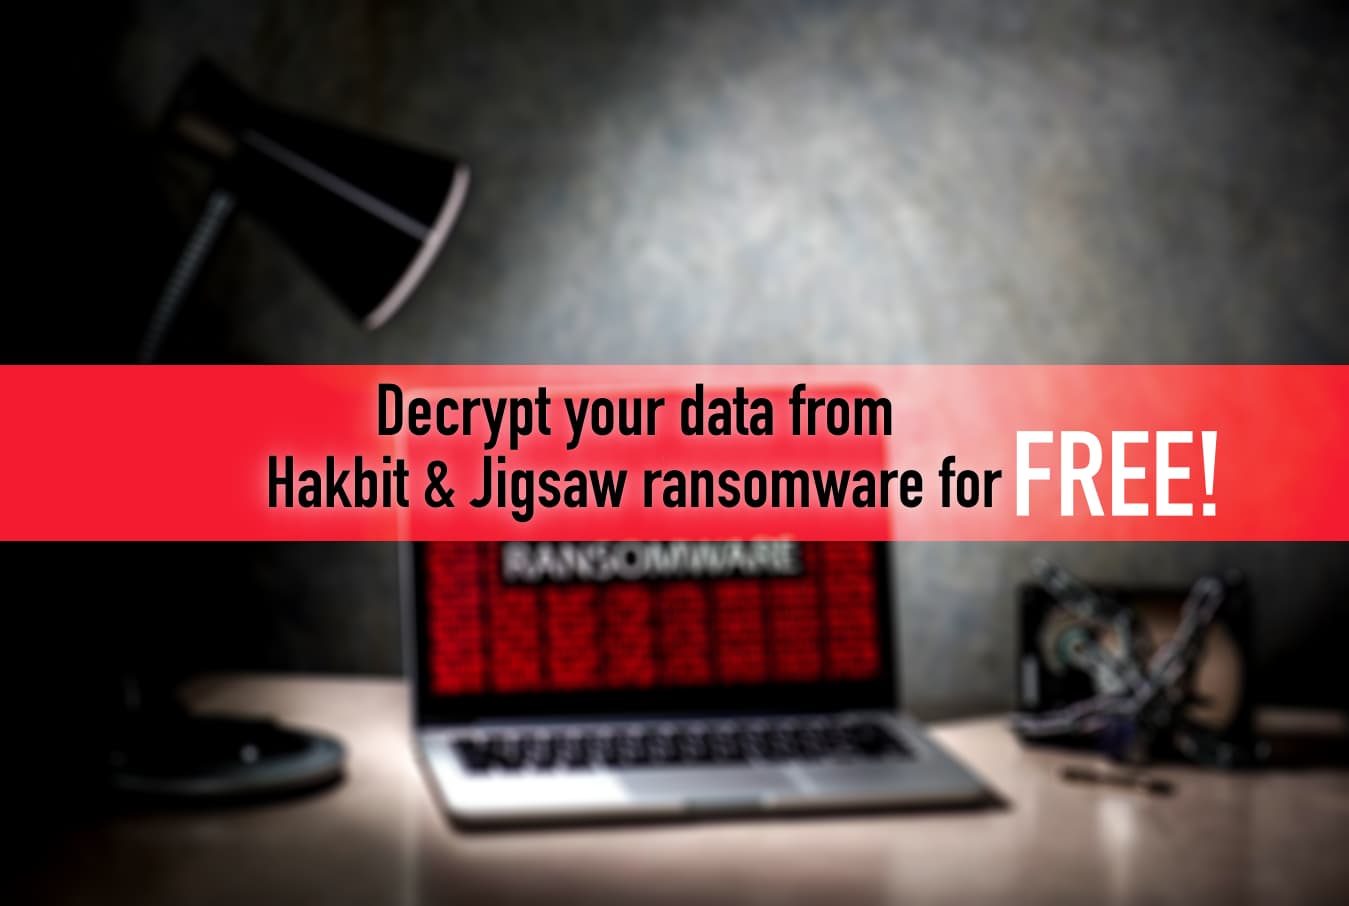 How to decrypt your data from Hakbit & Jigsaw ransomware for free